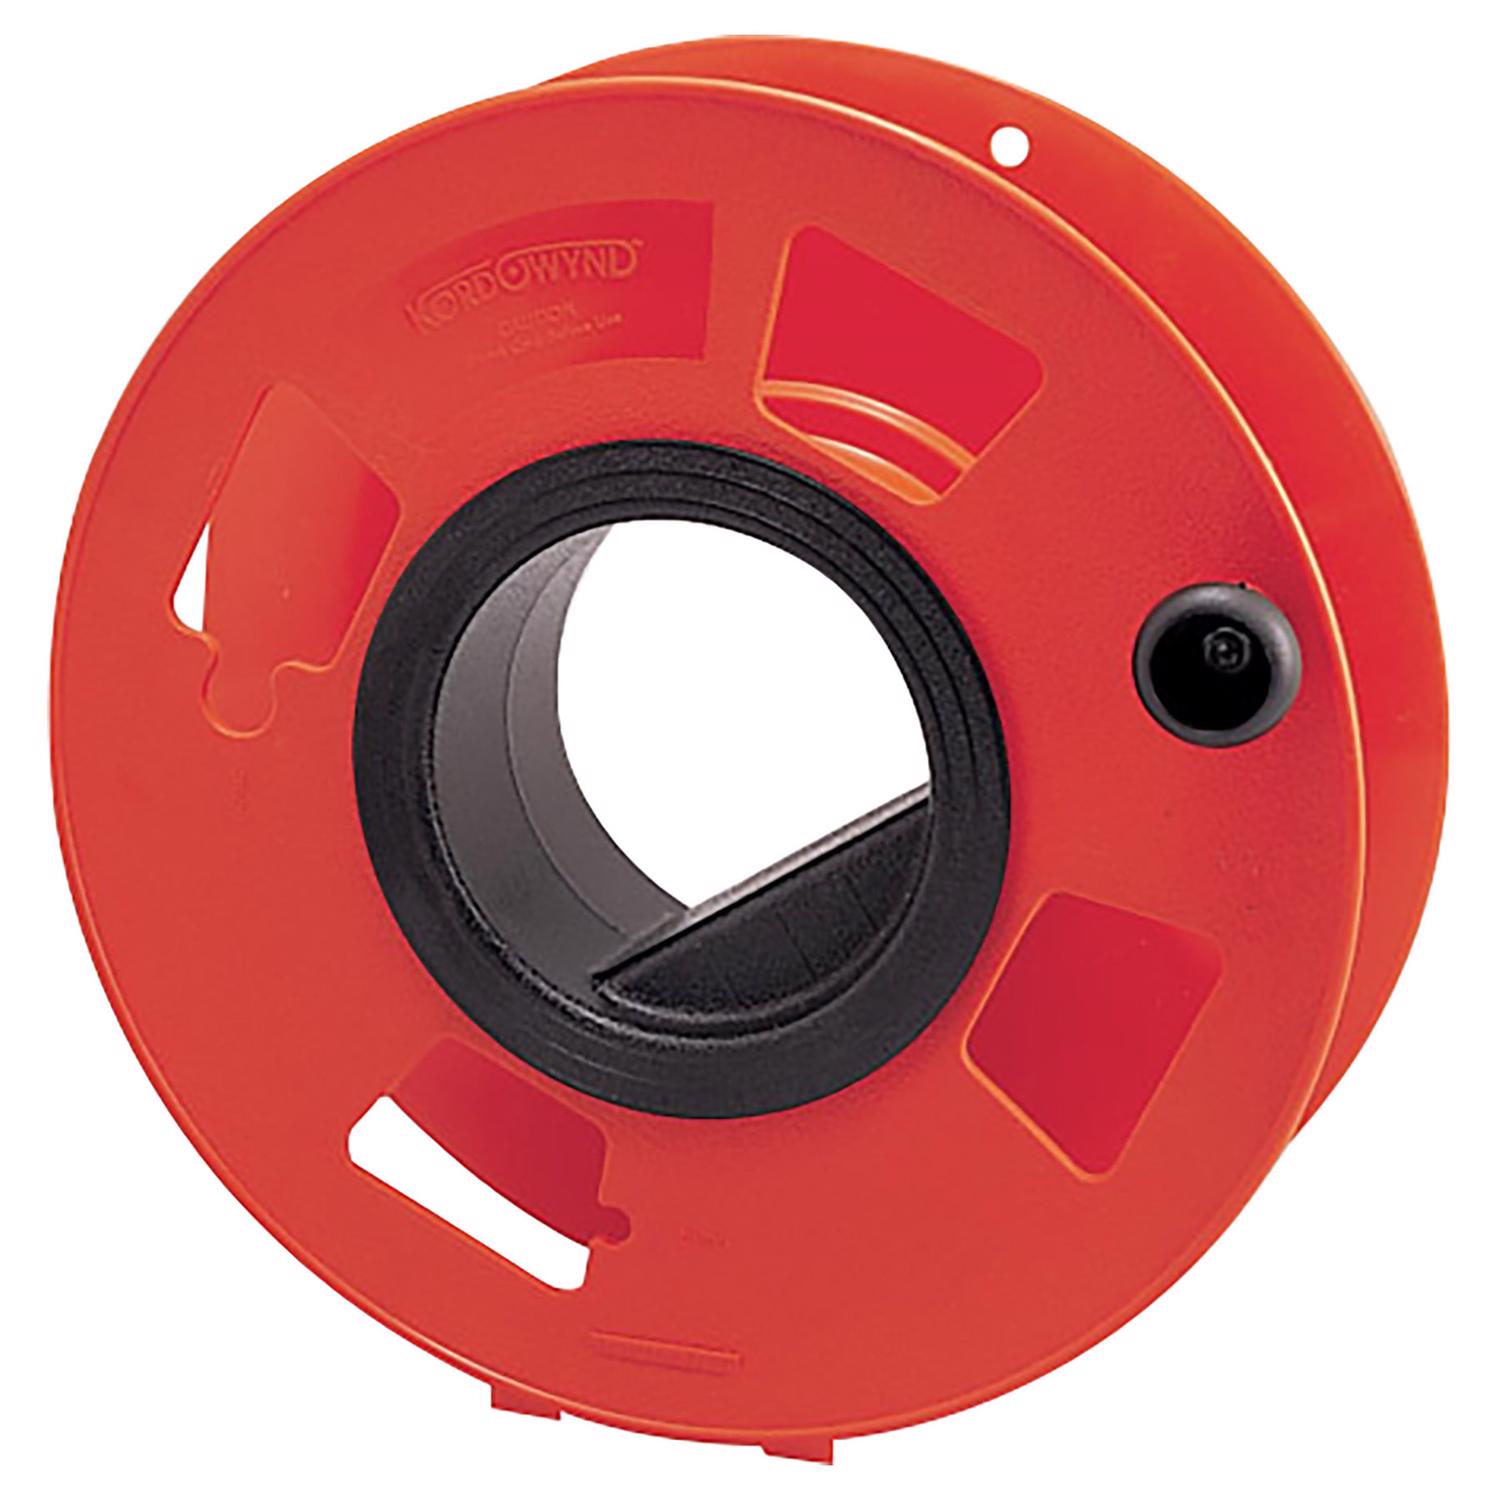 Bayco 100 ft. L Plastic Cord Reel - Ace Hardware